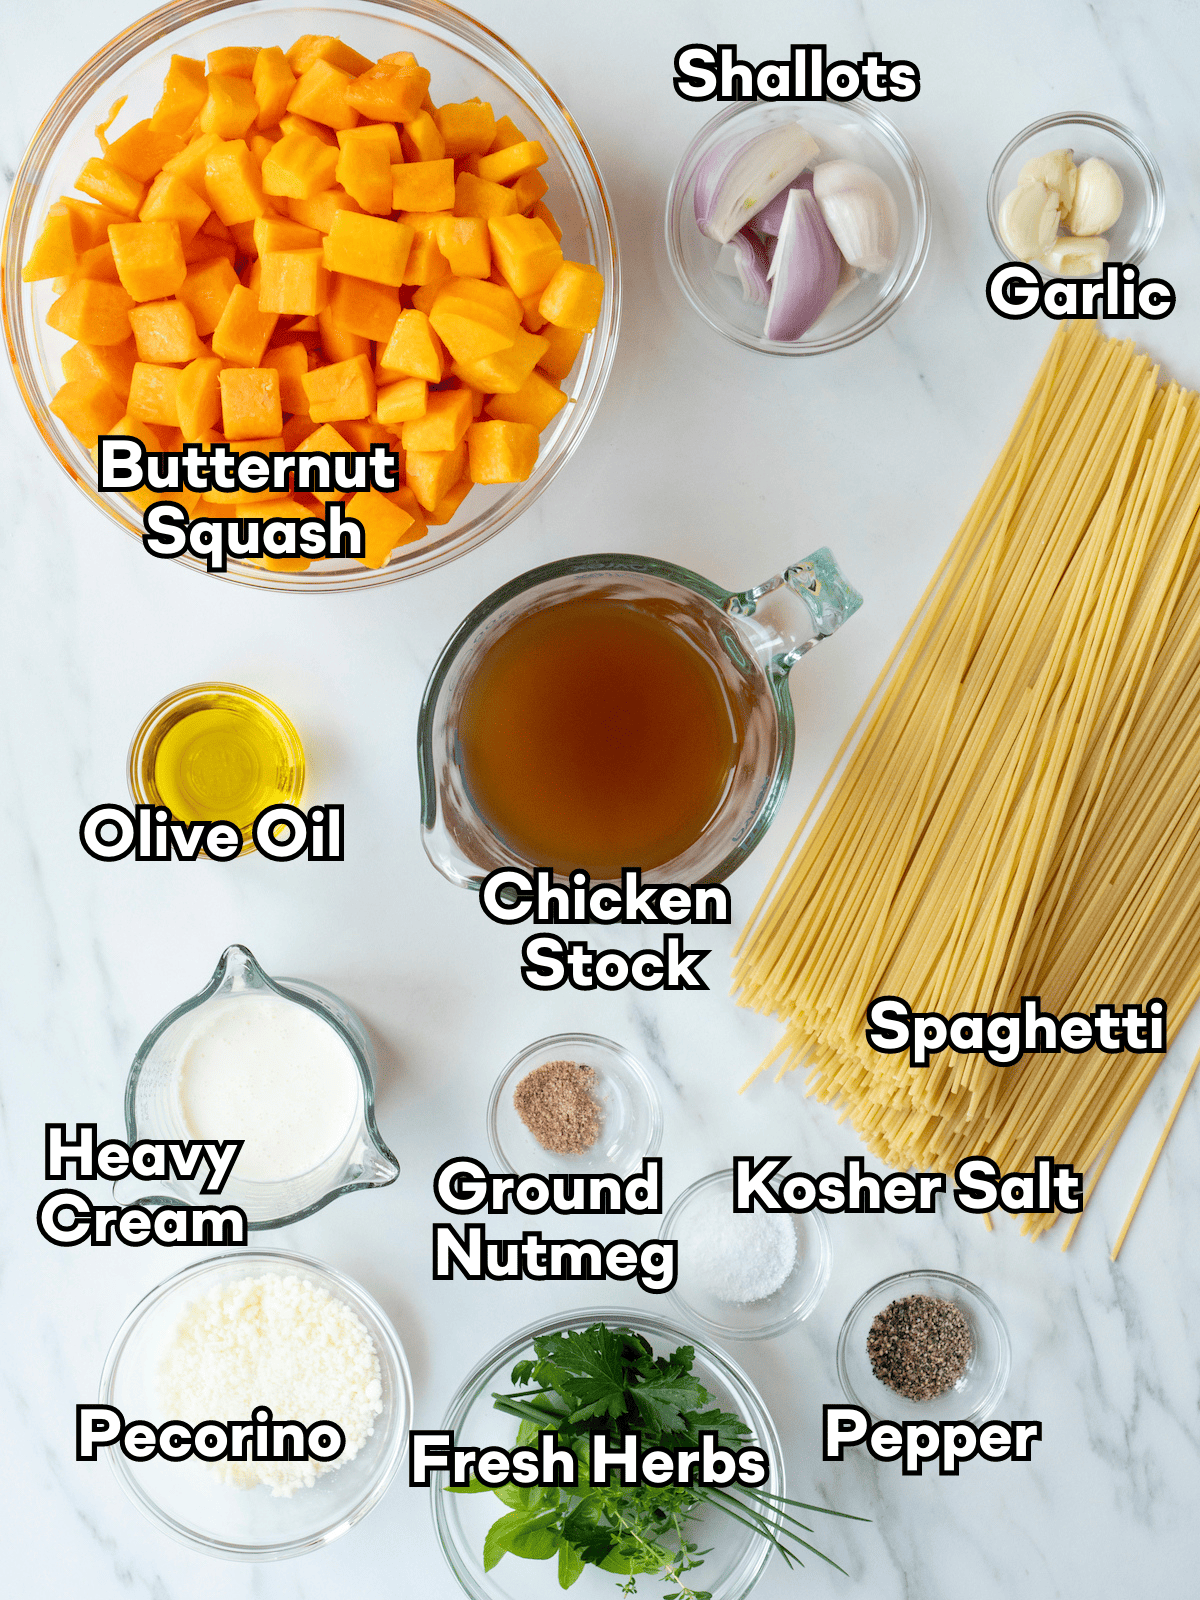 An overhead shot of all the ingredients needed to make this recipe.  Ingredients consist of butternut squash, shallots, garlic, olive oil, chicken stock, spaghetti, heavy cream, ground nutmeg, kosher salt, pecorino, fresh herbs, and pepper.  